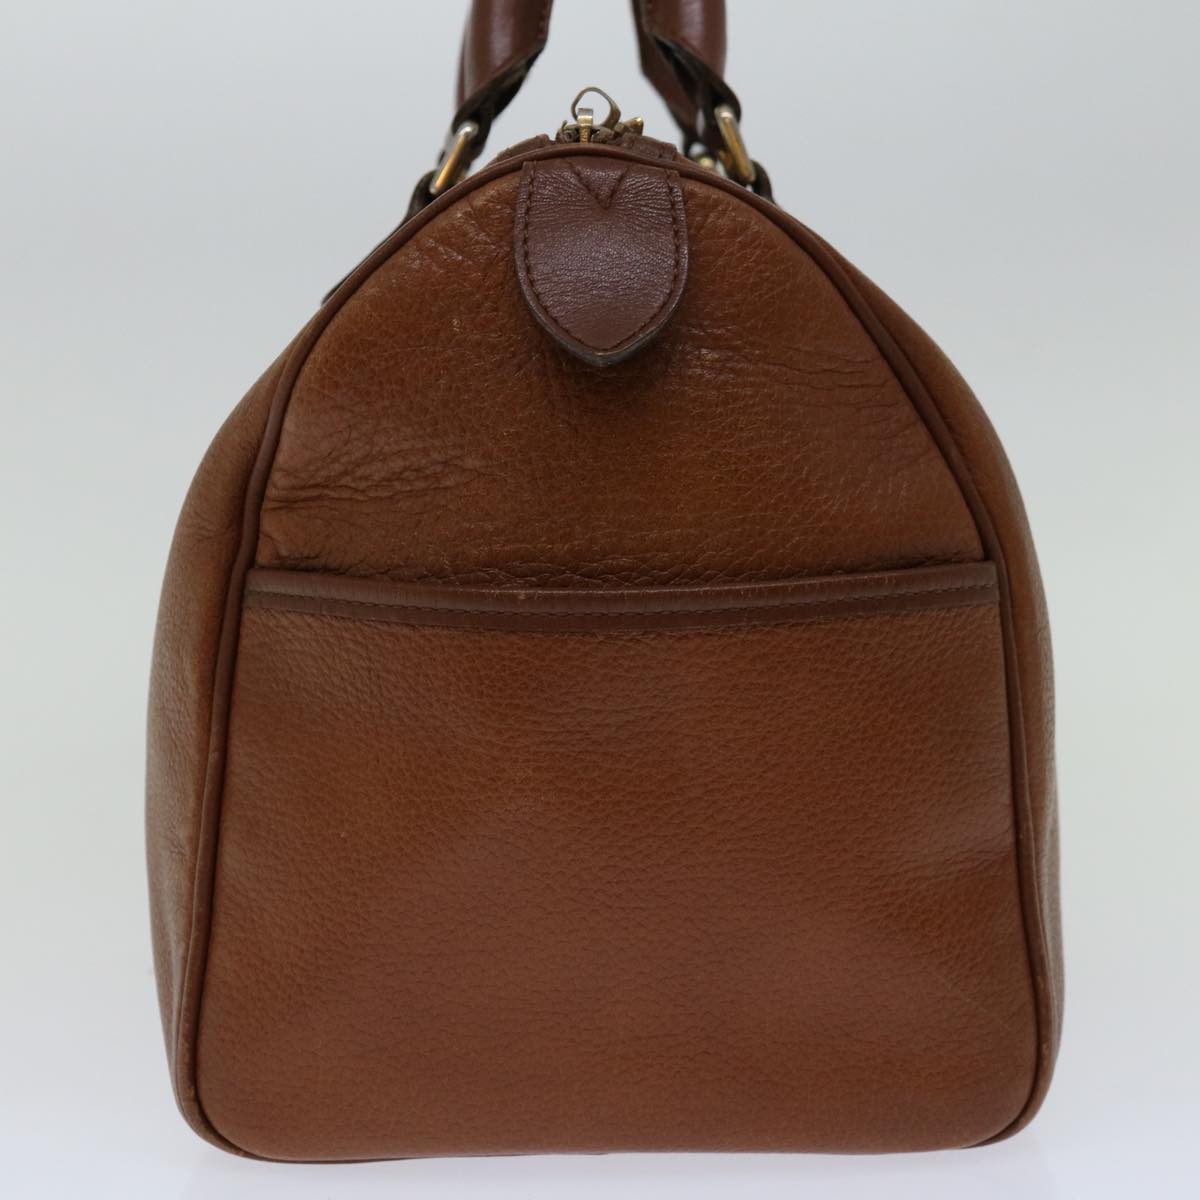 Burberrys Boston Bag Leather Brown Auth hk1146